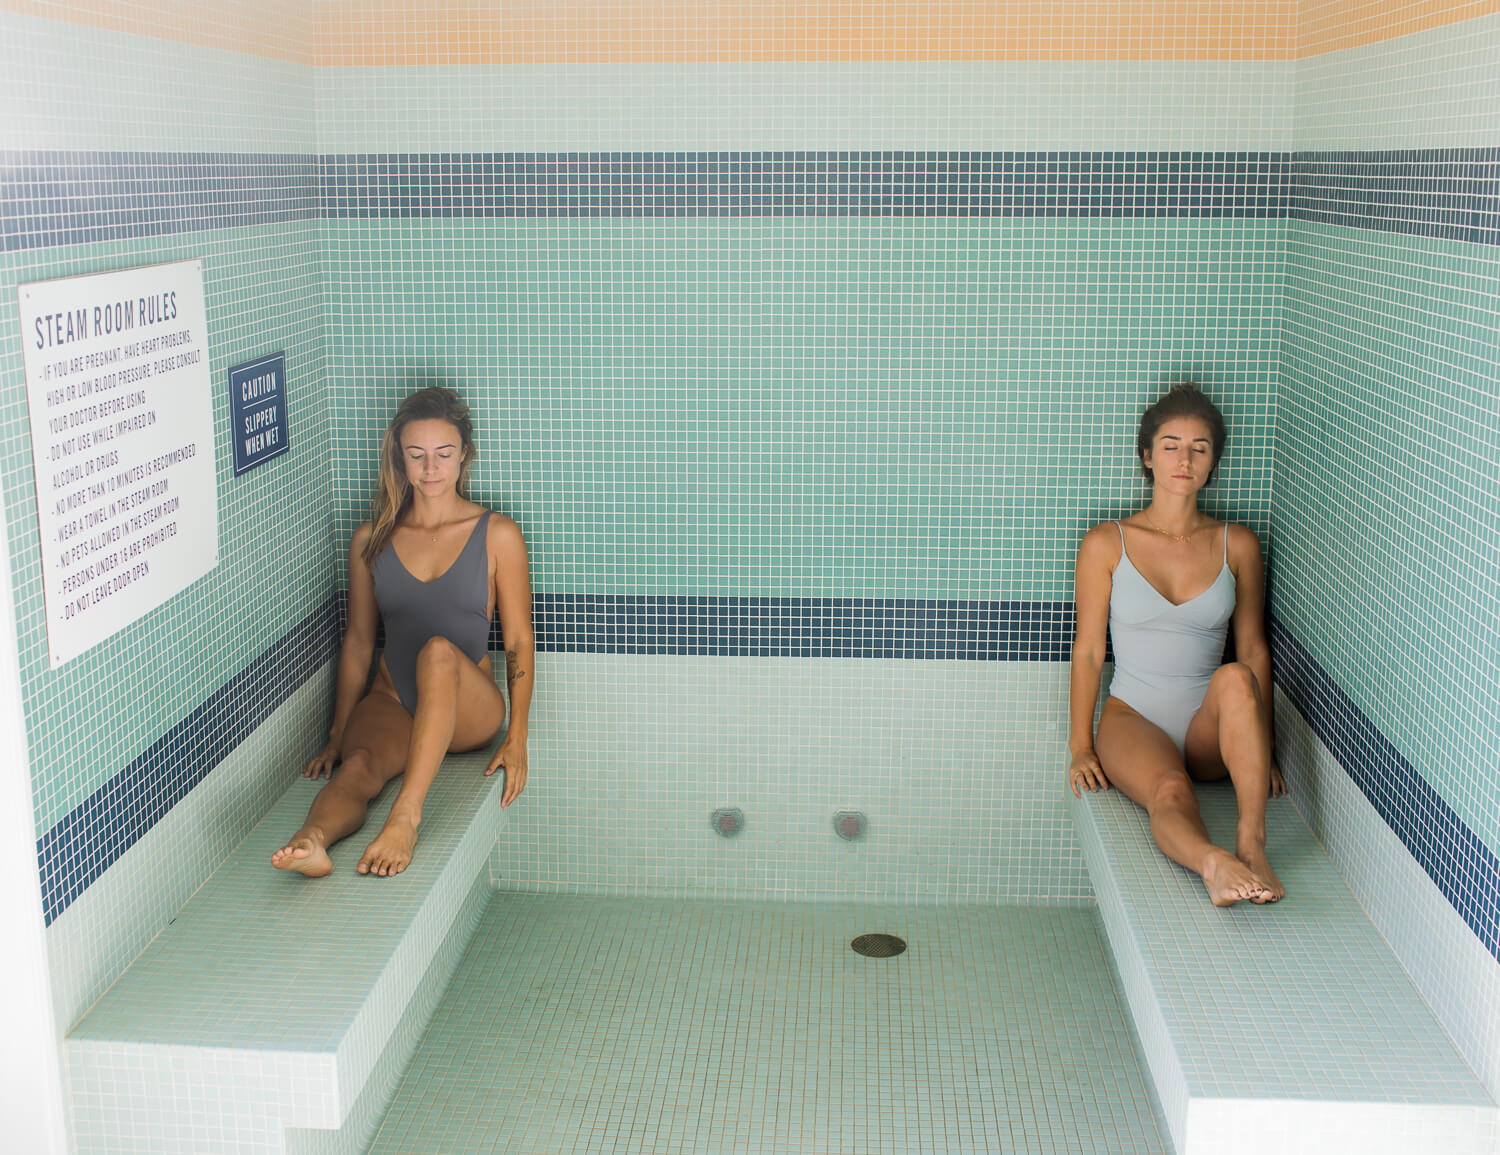 Image shows two women sitting in the steam room at MoonAcre spa